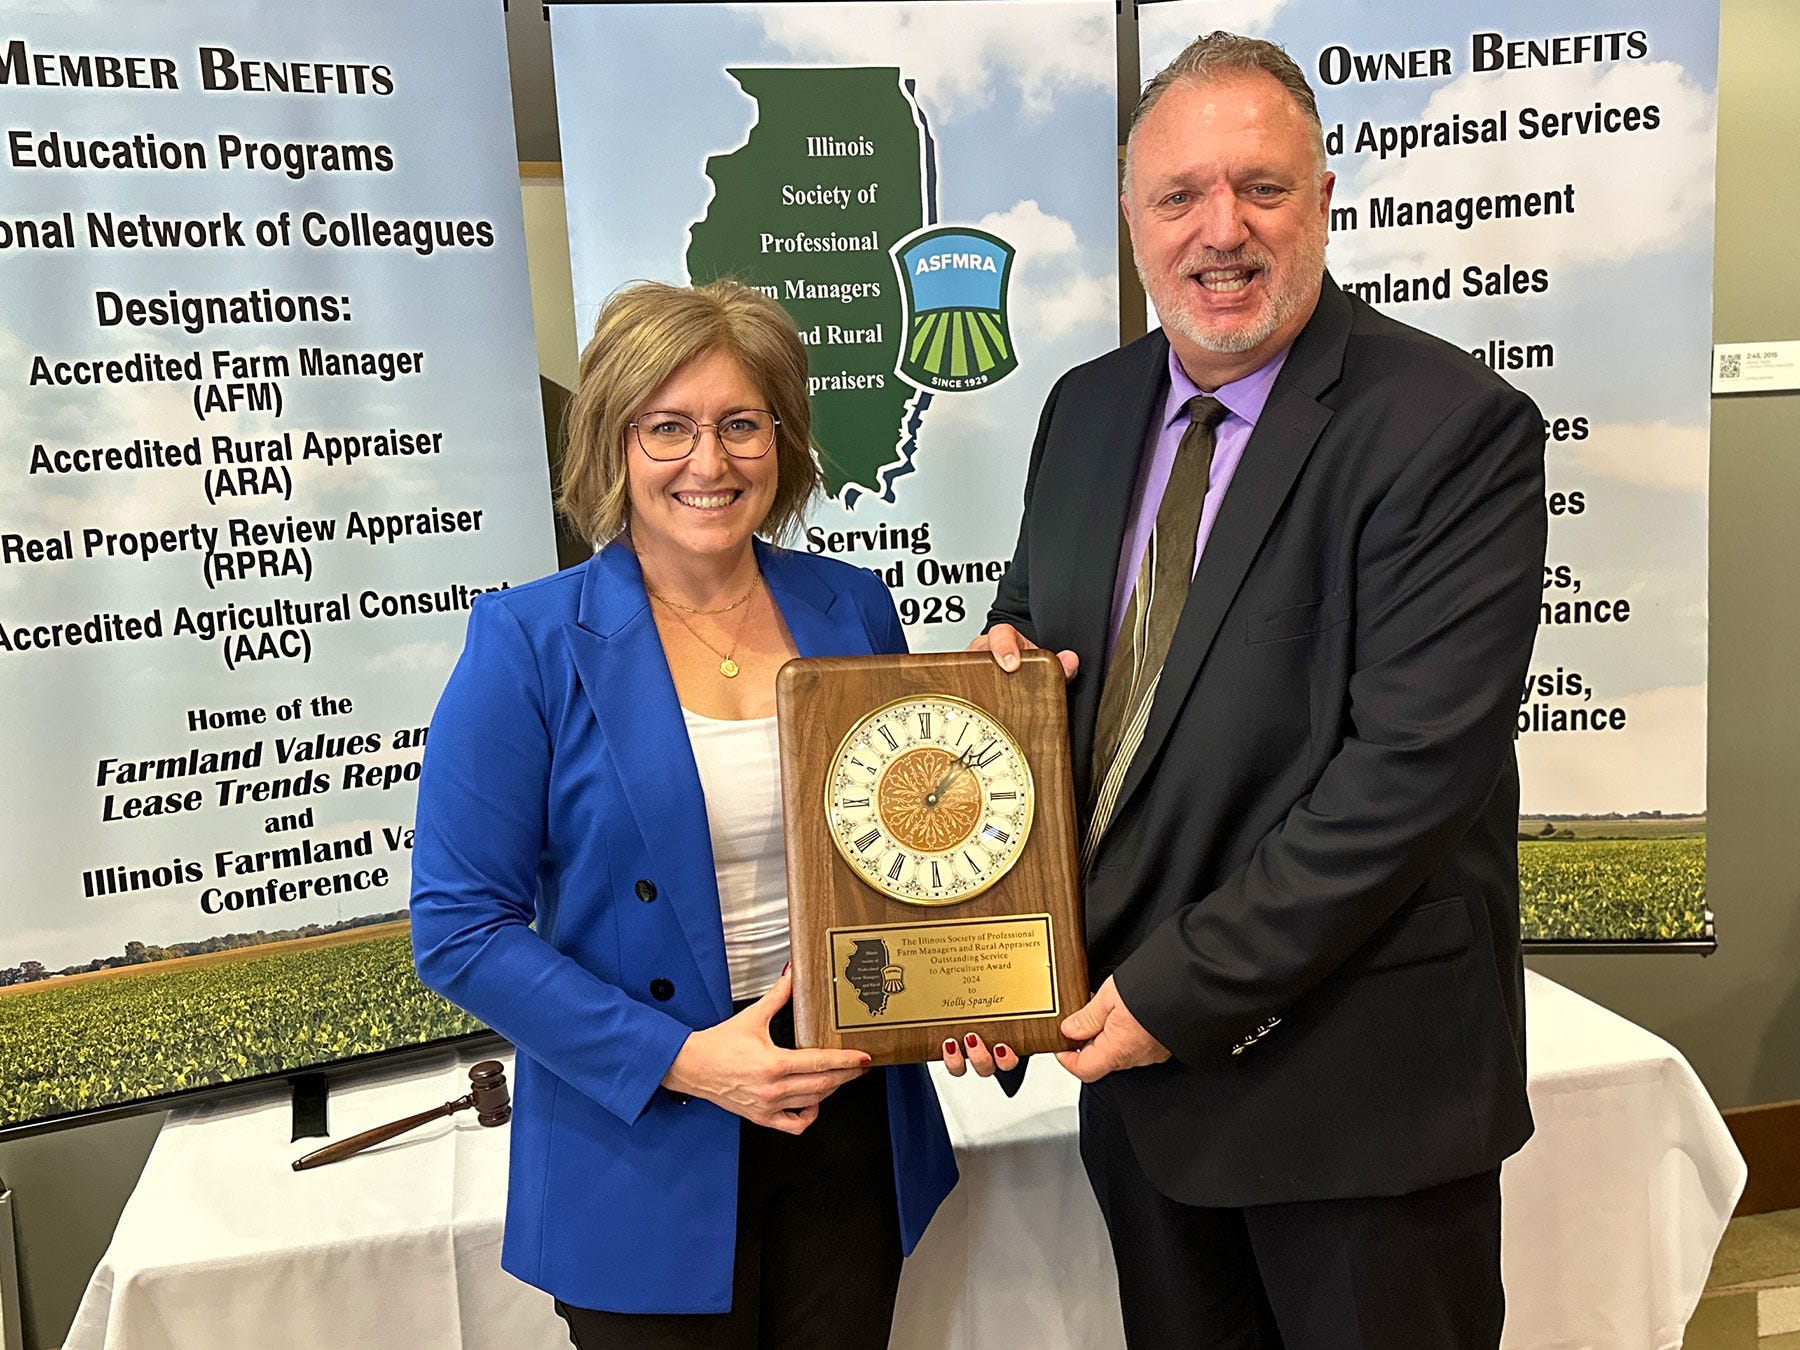 Holly Spangler and Michael Lauher holding a plaque